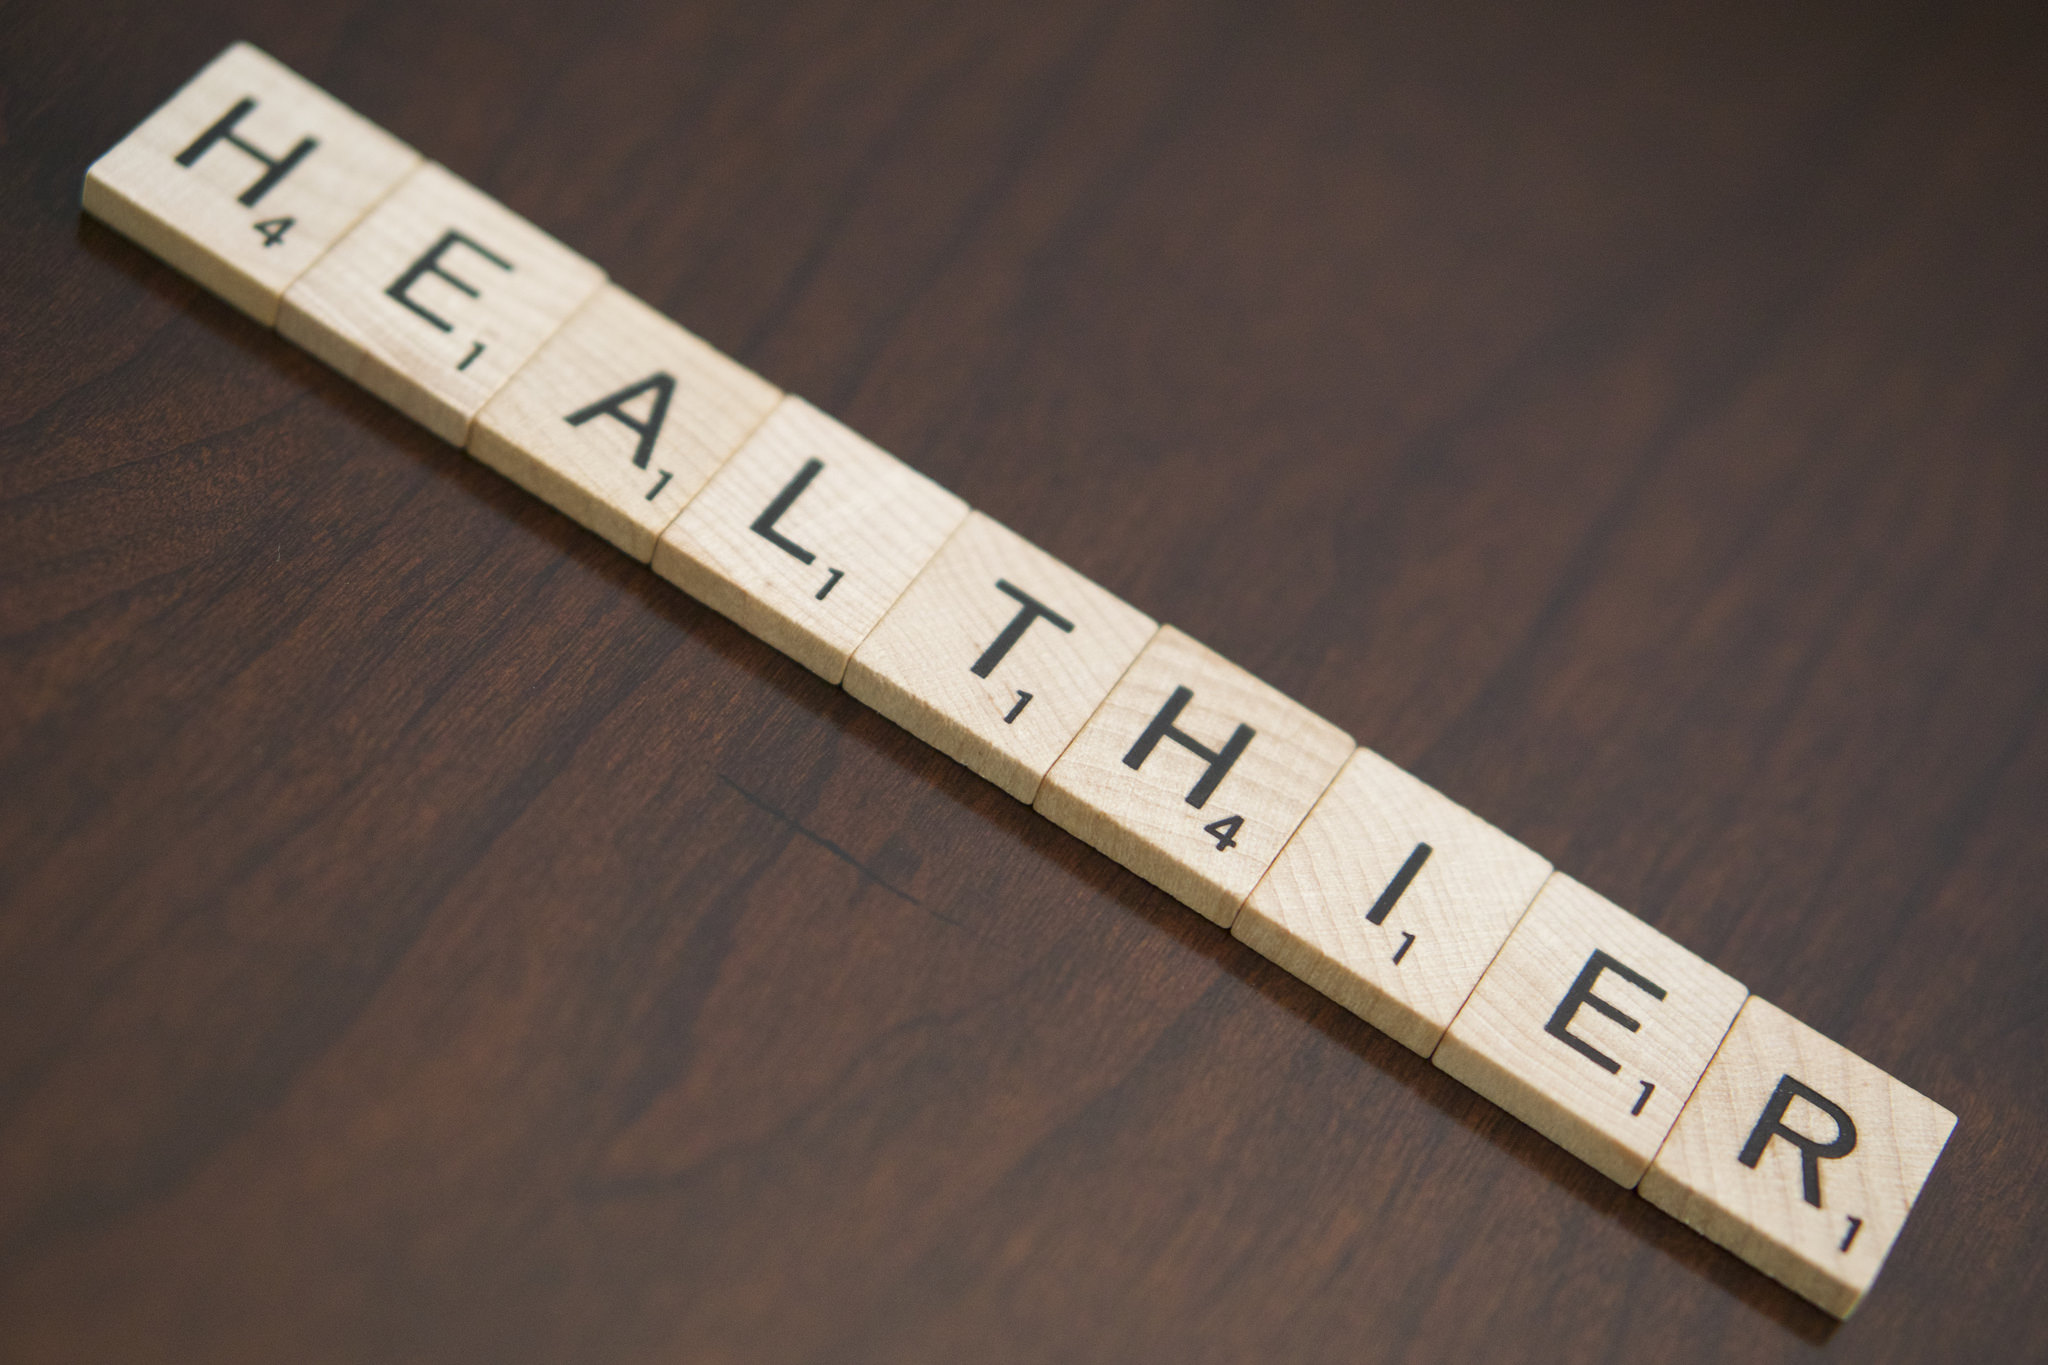 The word "Healthier" spelled out in Scrabble tiles, published as part of "How Healthcare Organizations Can Use Social Media for Relationship-Building"